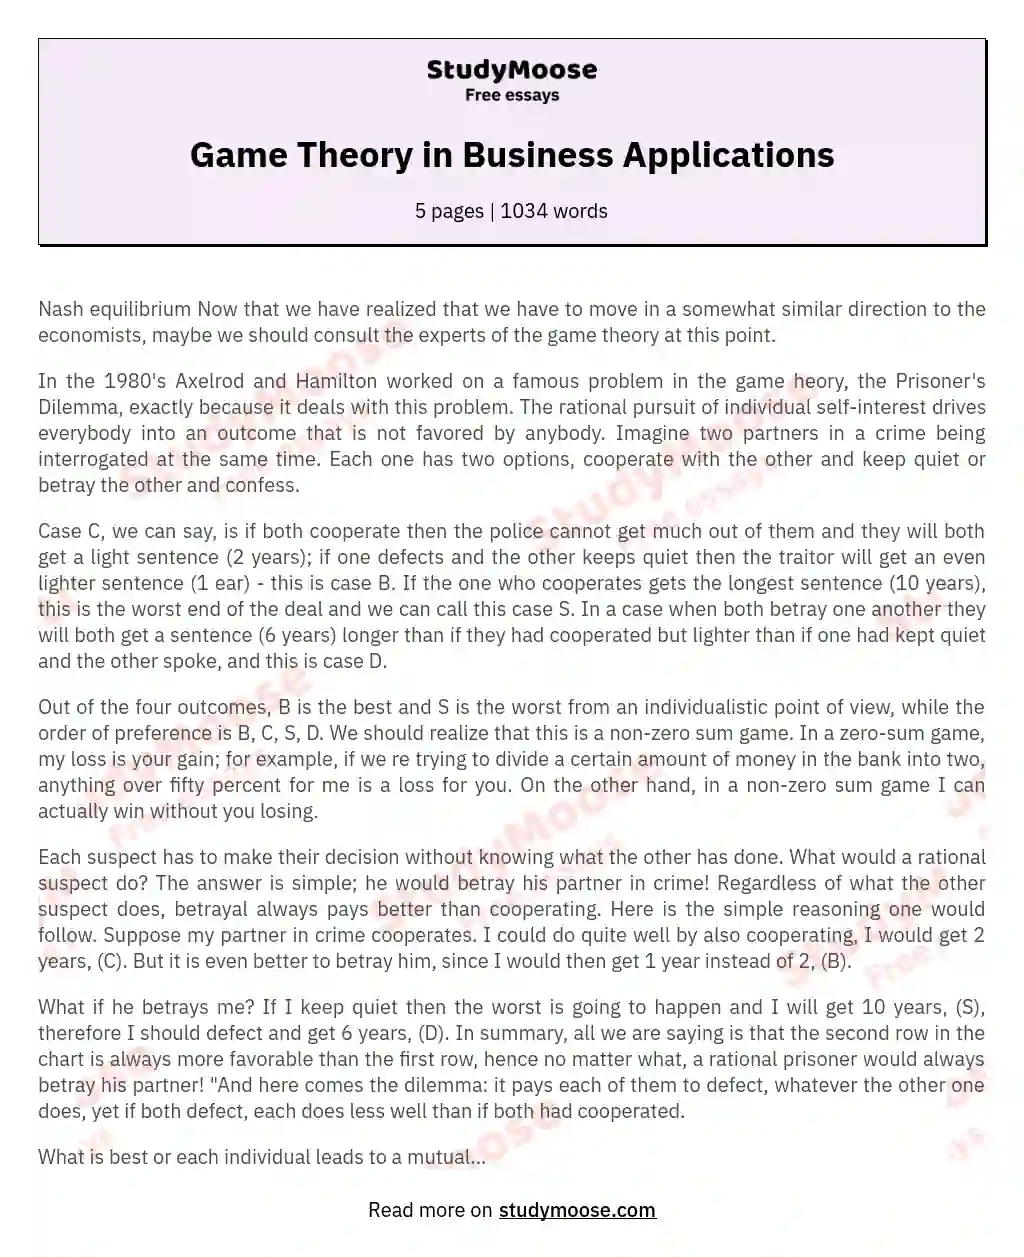 Game Theory in Business Applications essay